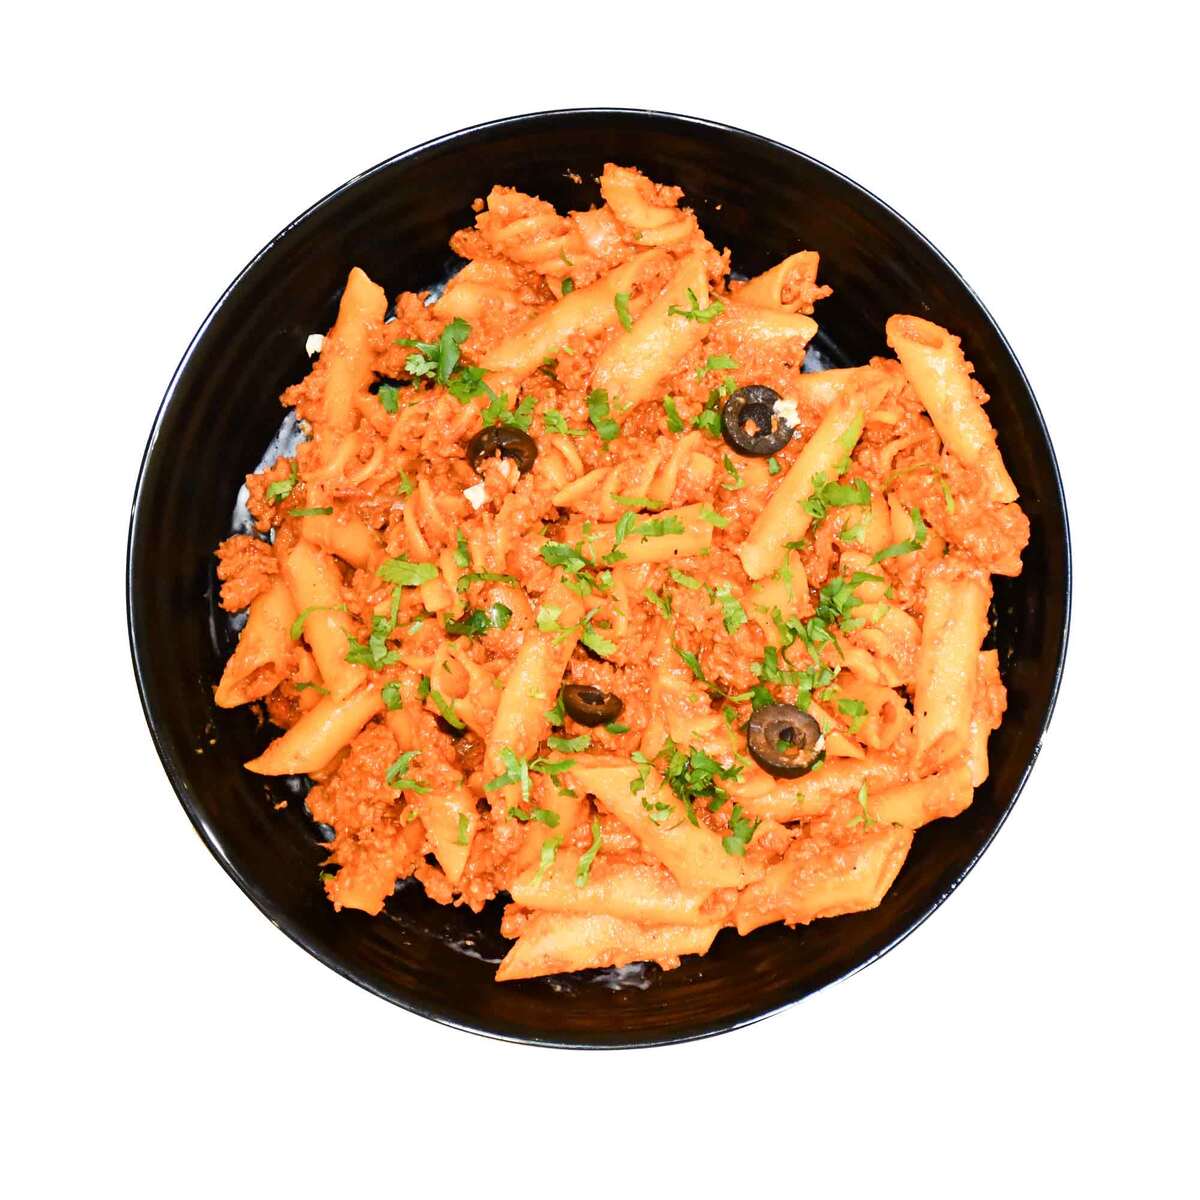 Pasta With Meat 750 g